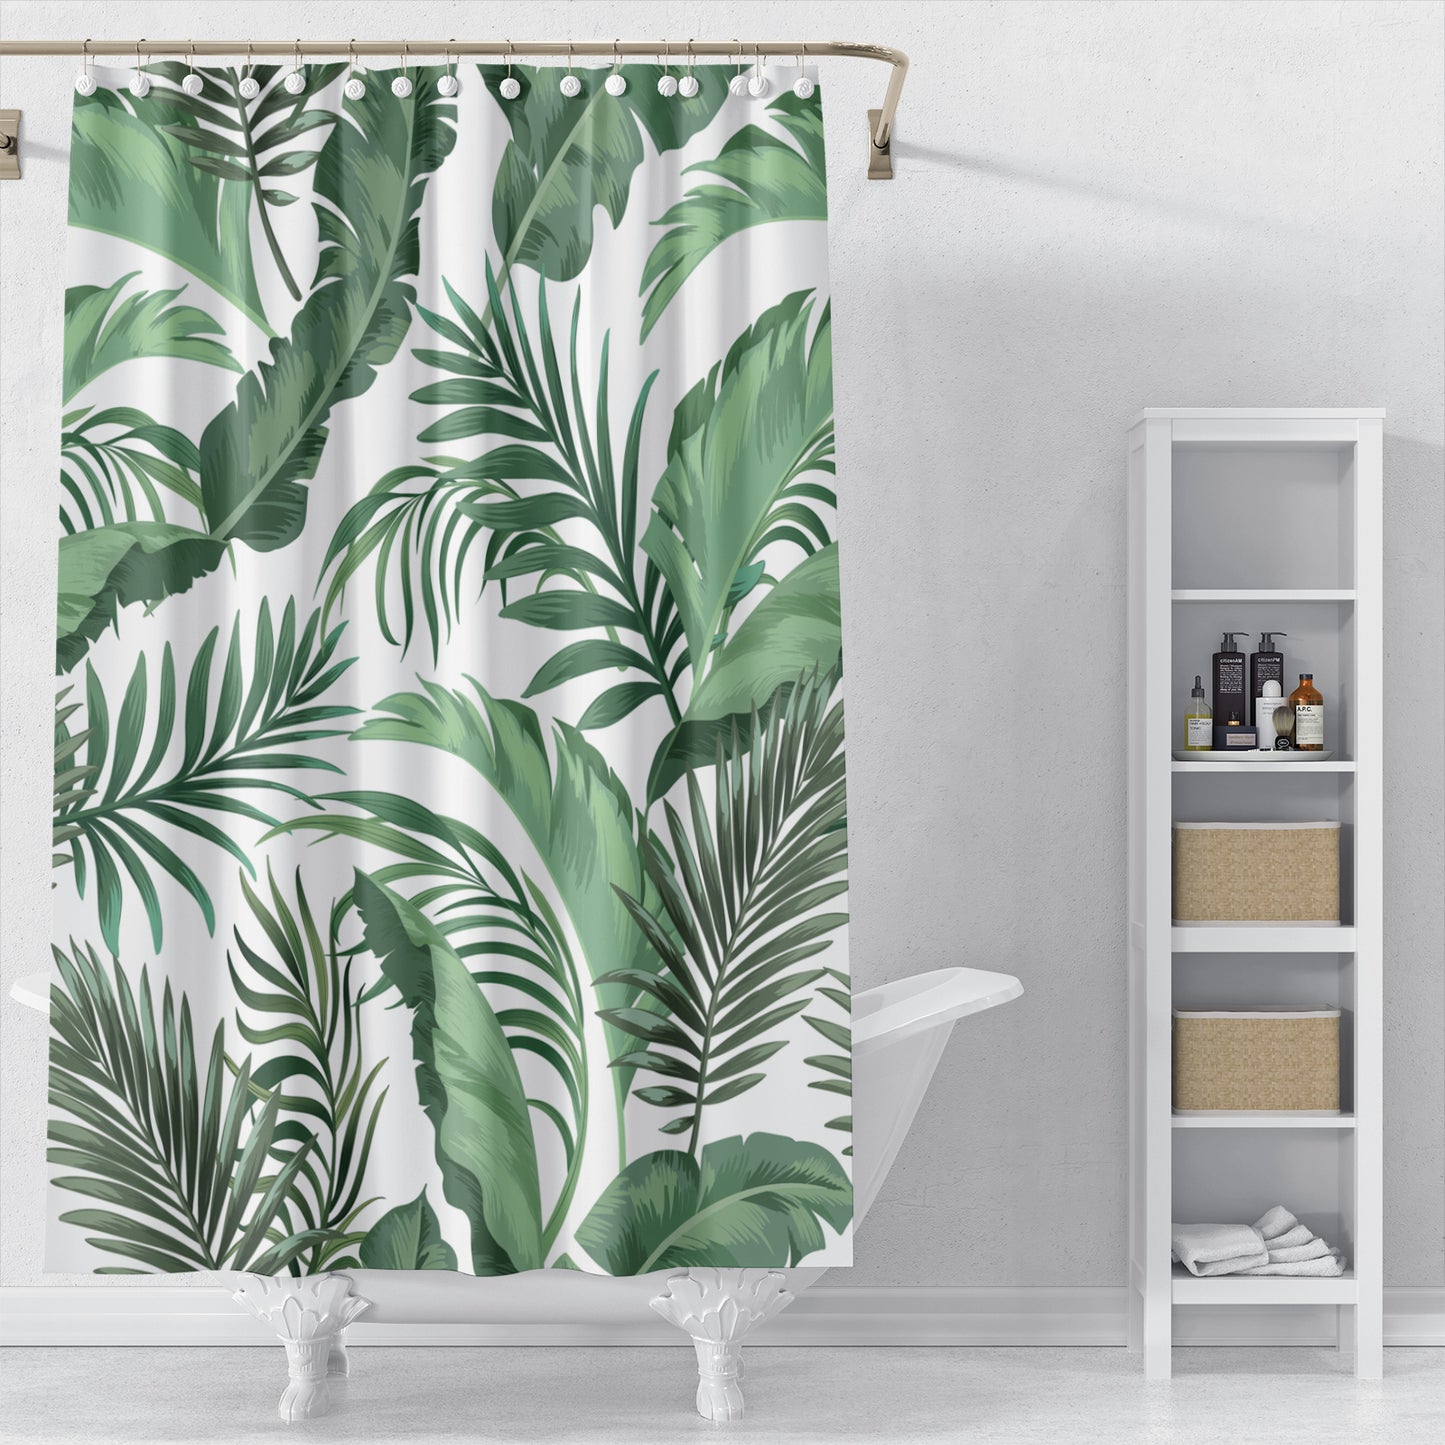 Wongs Bedding Leaves Pattern Mould Proof Resistan Polyester Fabric Shower Curtain